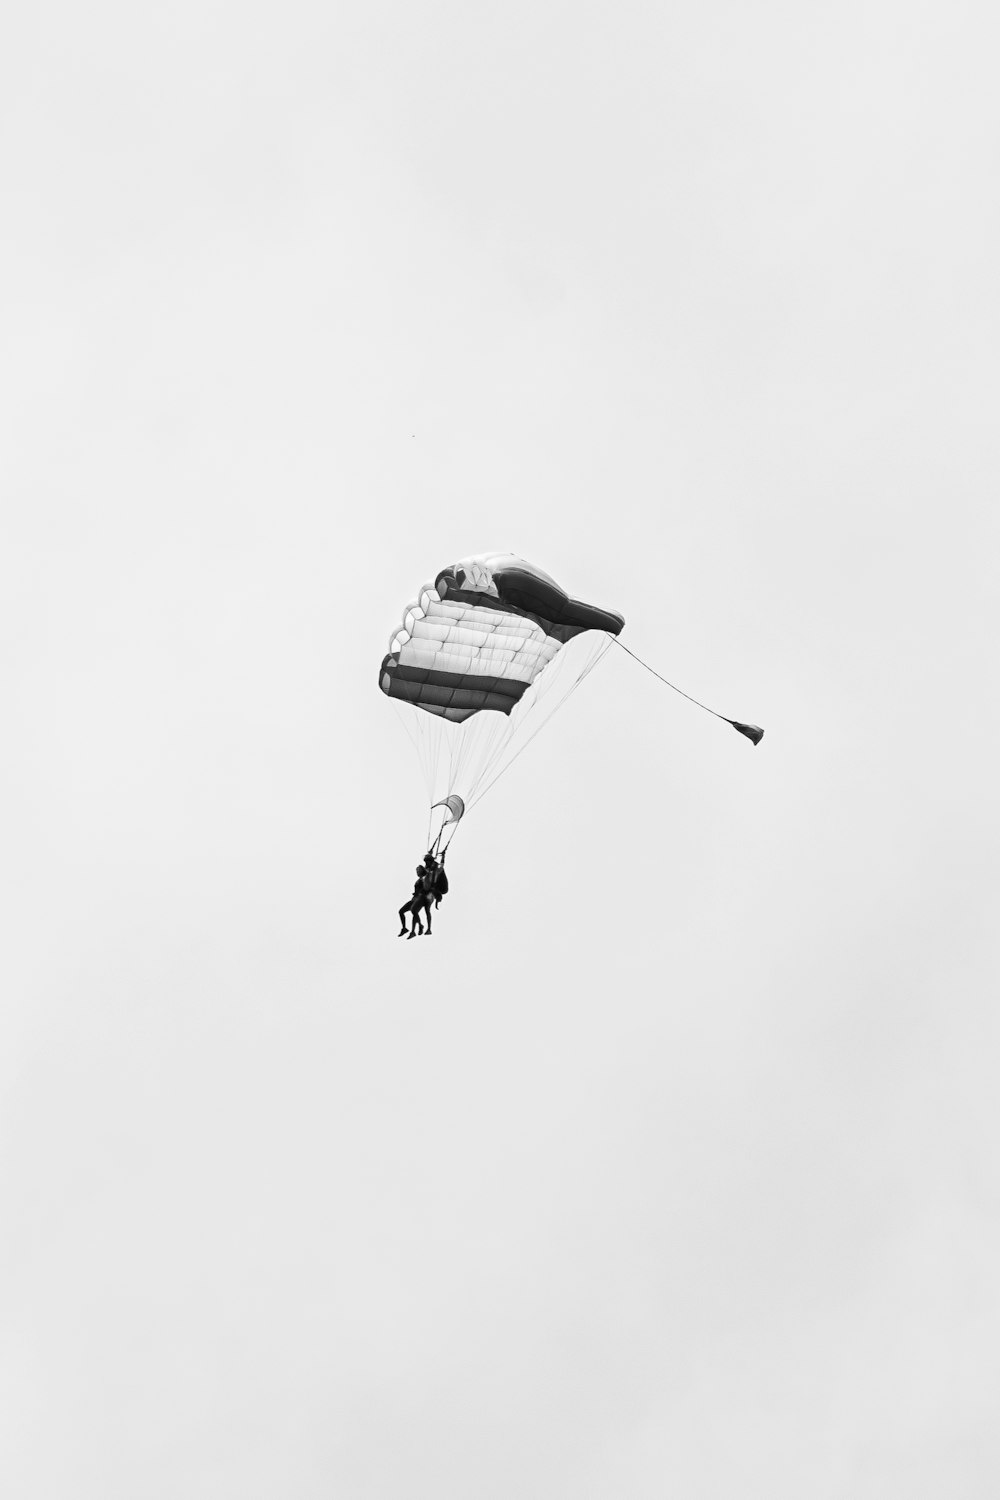 person in parachute in grayscale photography